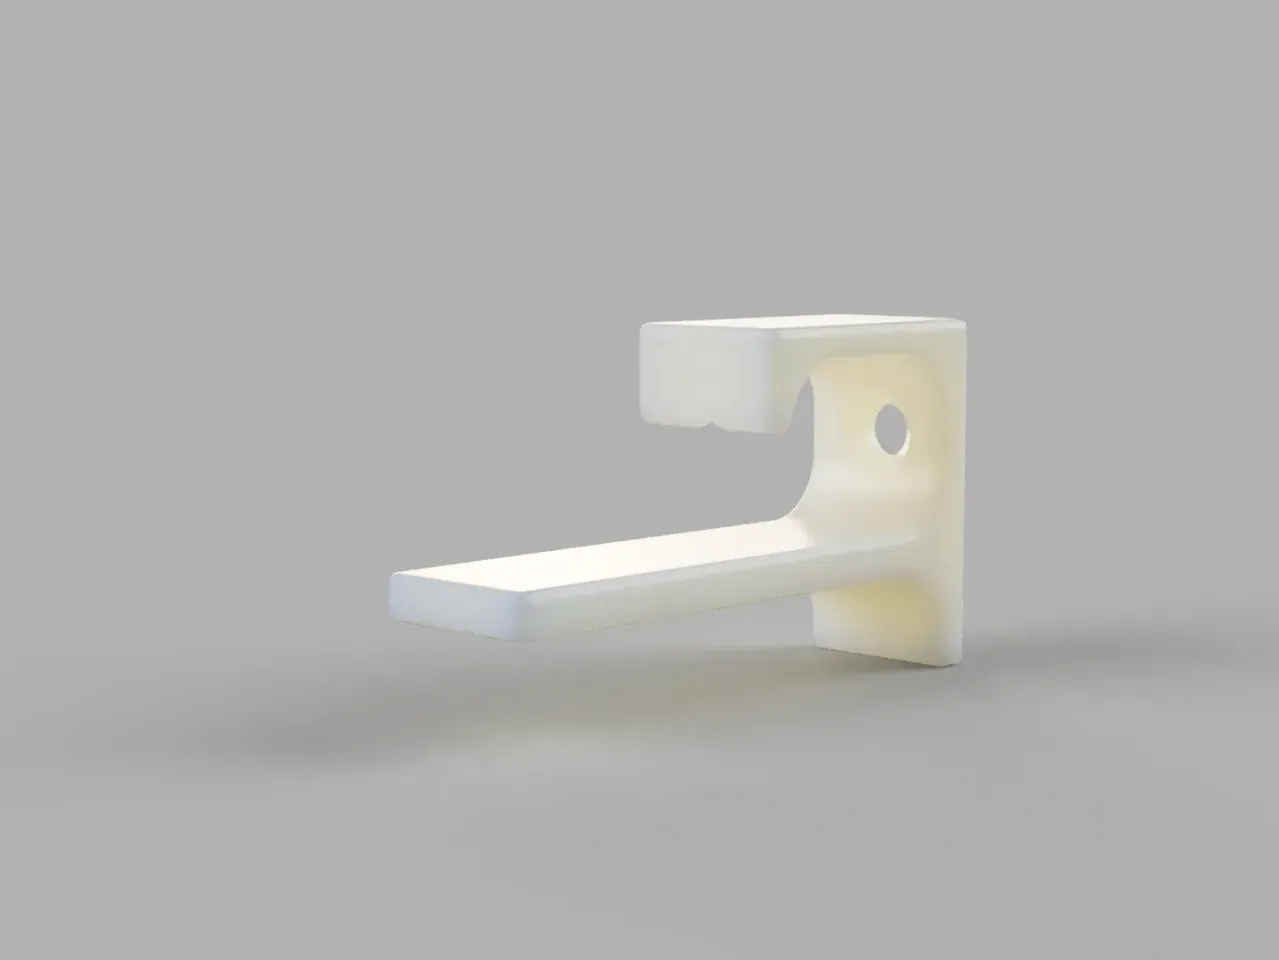 Cap Hook by Christian A, Download free STL model